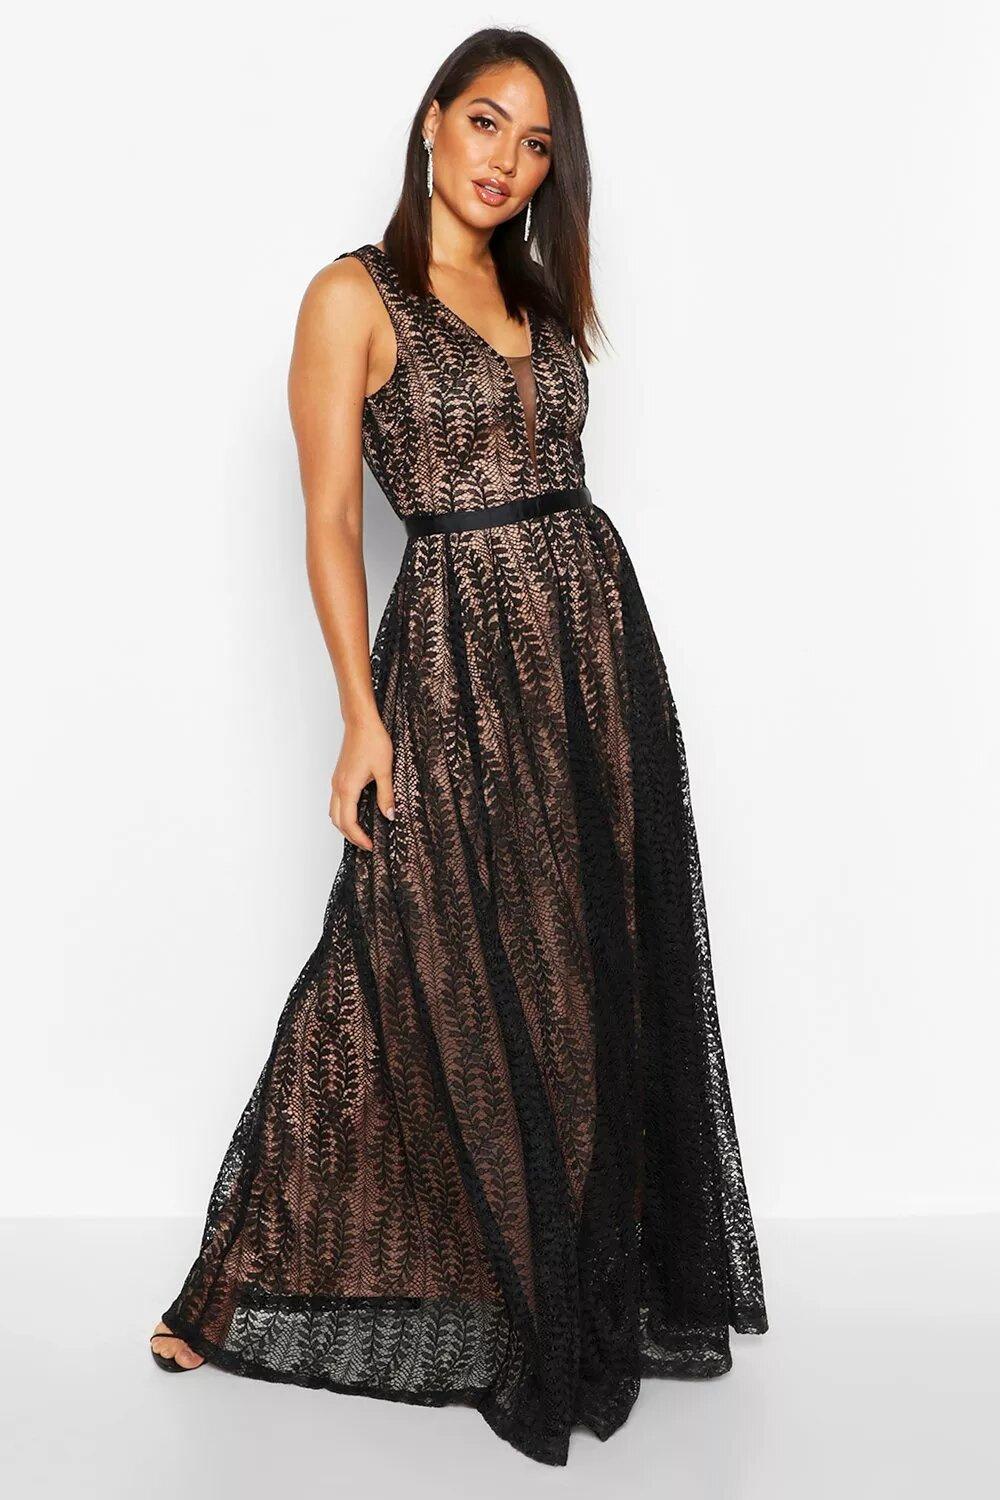 28 Best Black Bridesmaid Dresses 2022 - hitched.co.uk - hitched.co.uk